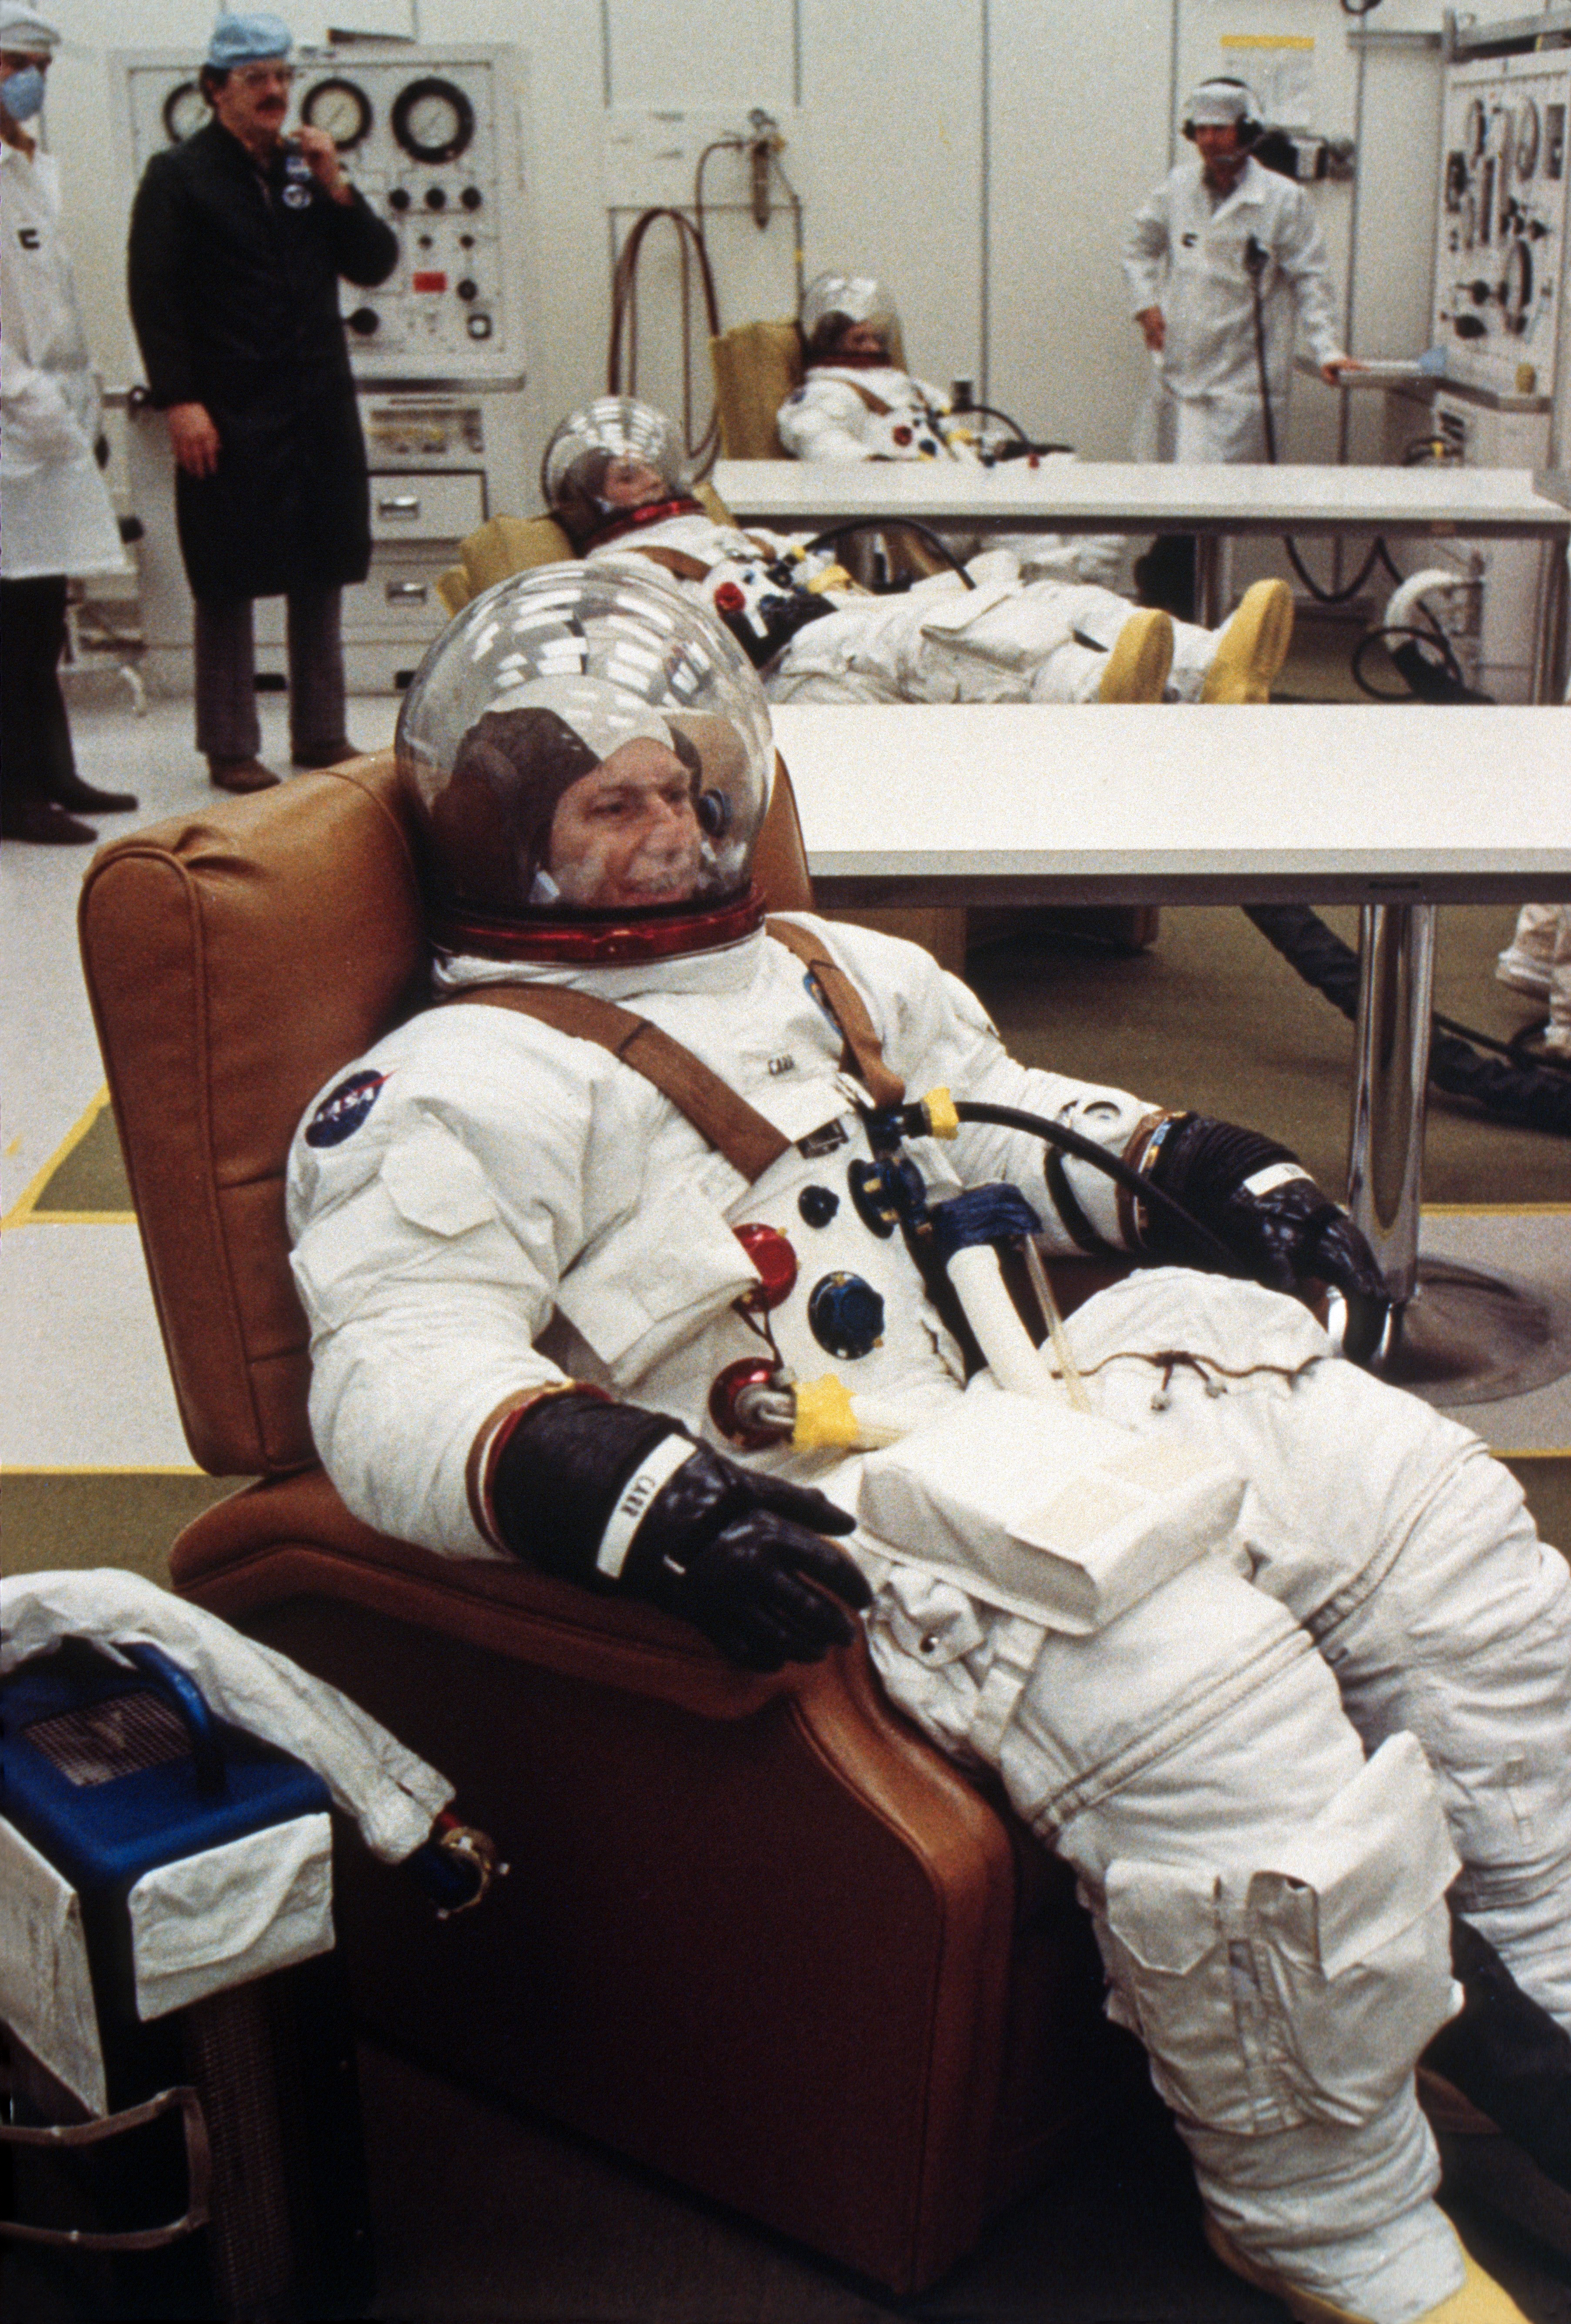 Carr, Gibson, and Pogue test the pressure integrity of their spacesuits before launch